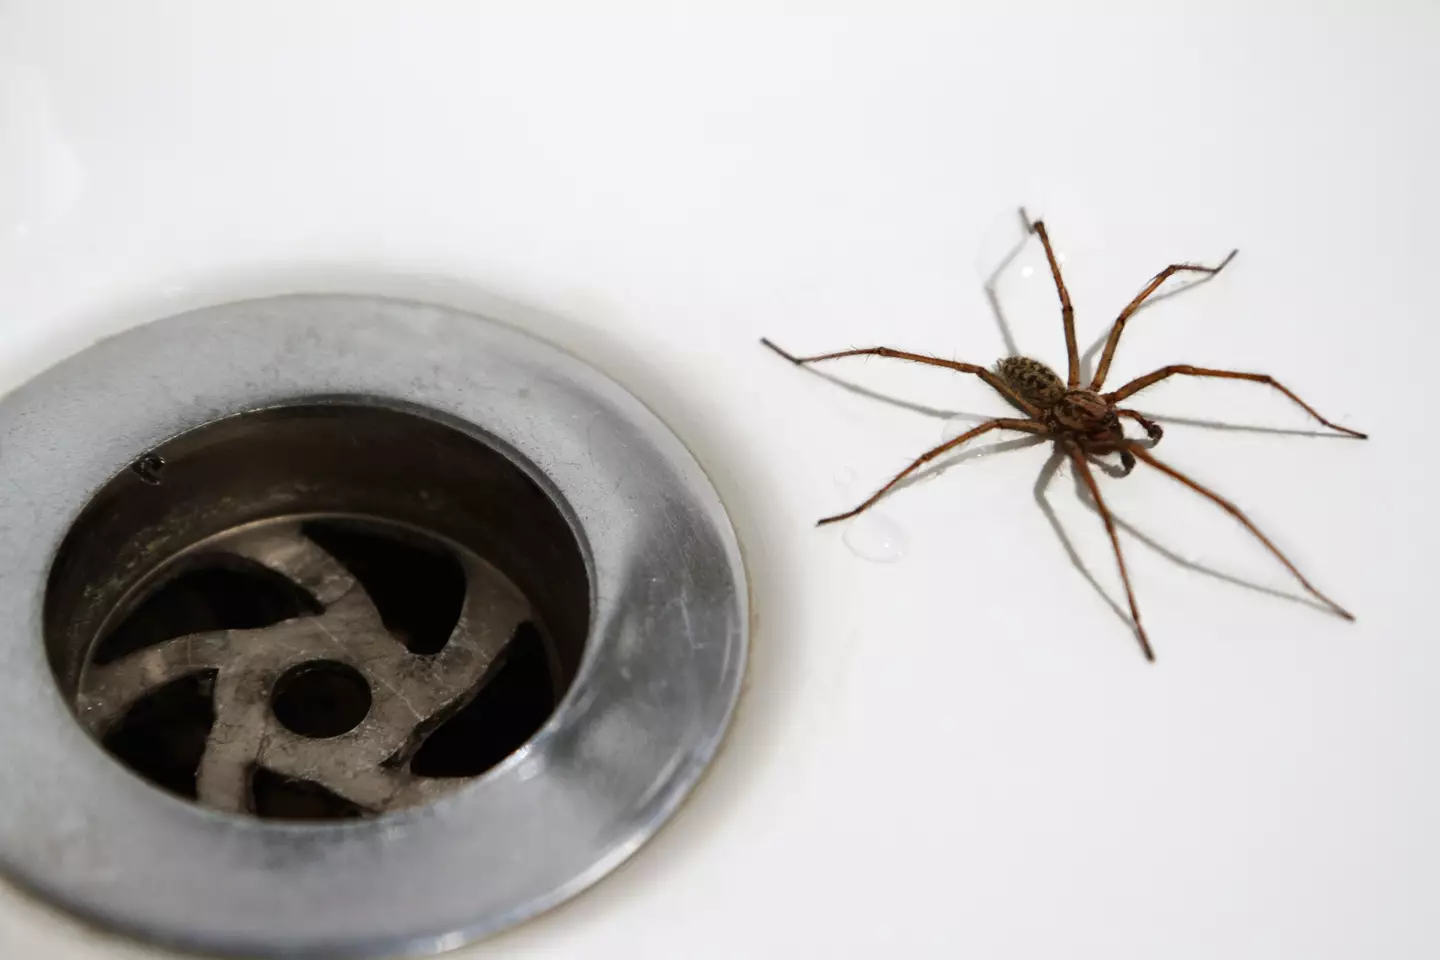 The woman found a spider in her home and called 999.